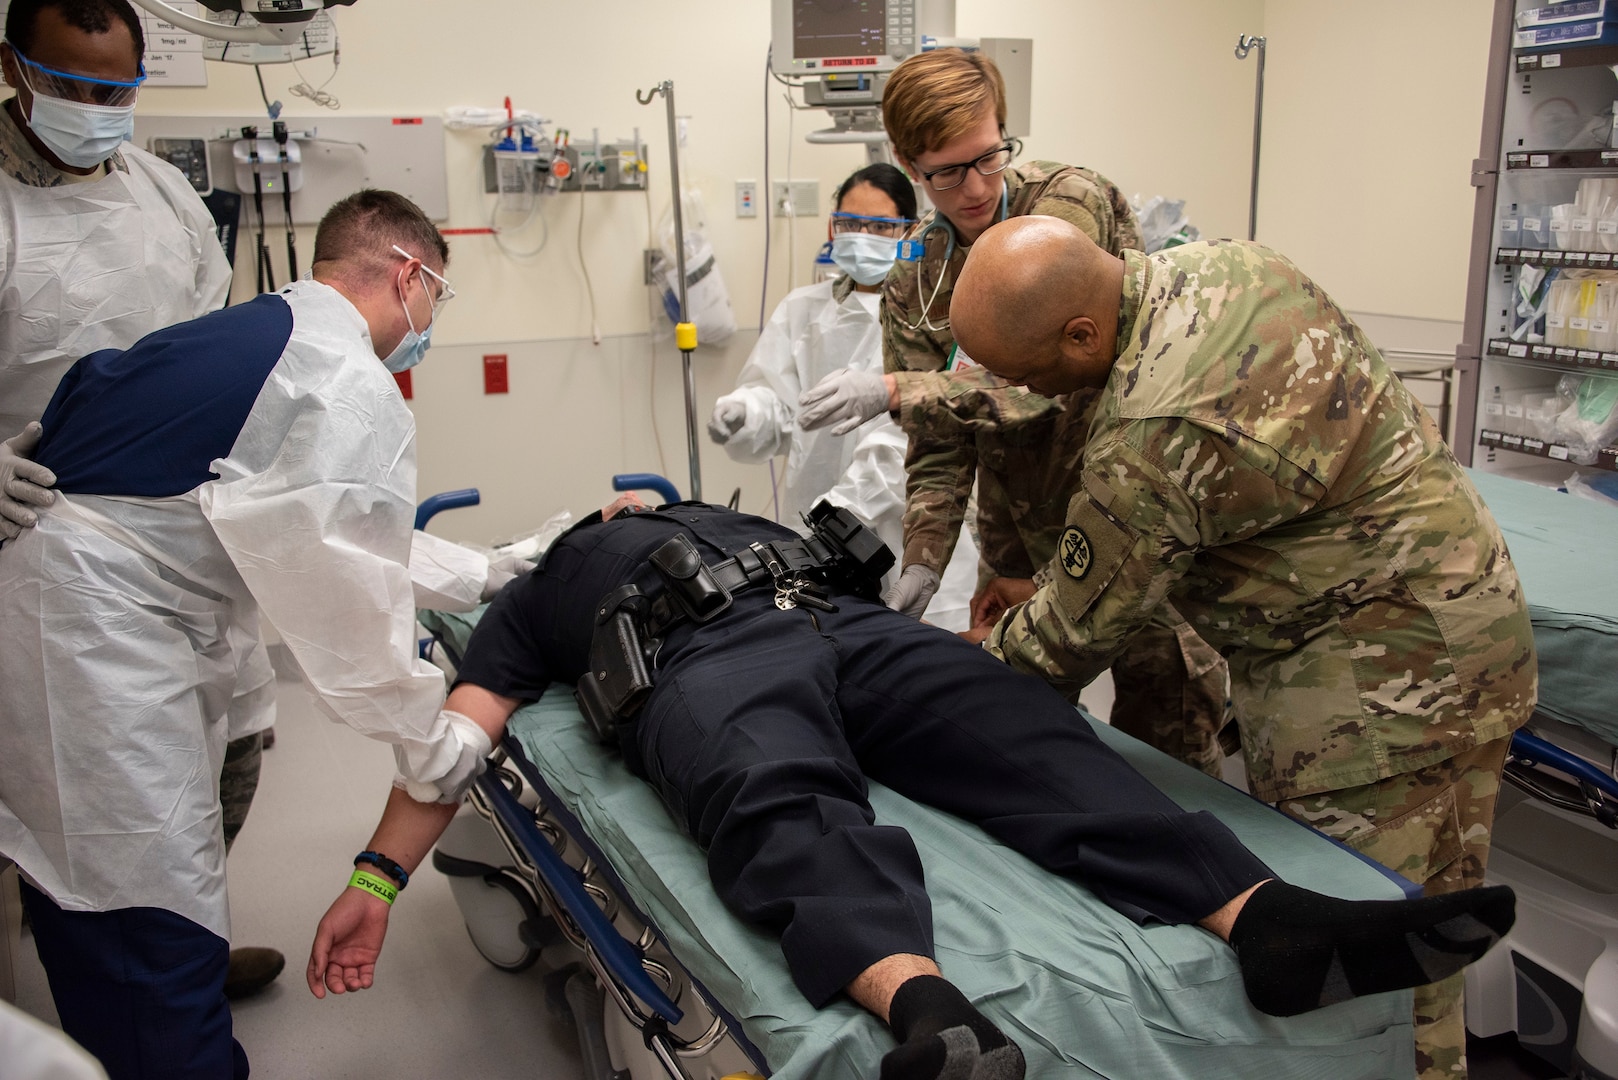 Members of Brooke Army Medical Center’s medical staff assist an exercise role player during the 2018 San Antonio Mass Casualty Exercise and Evaluation at Brooke Army Medical Center Oct. 11. Nearly 700 volunteers role-played as victims and family members during the largest mass casualty exercise ever held in San Antonio.